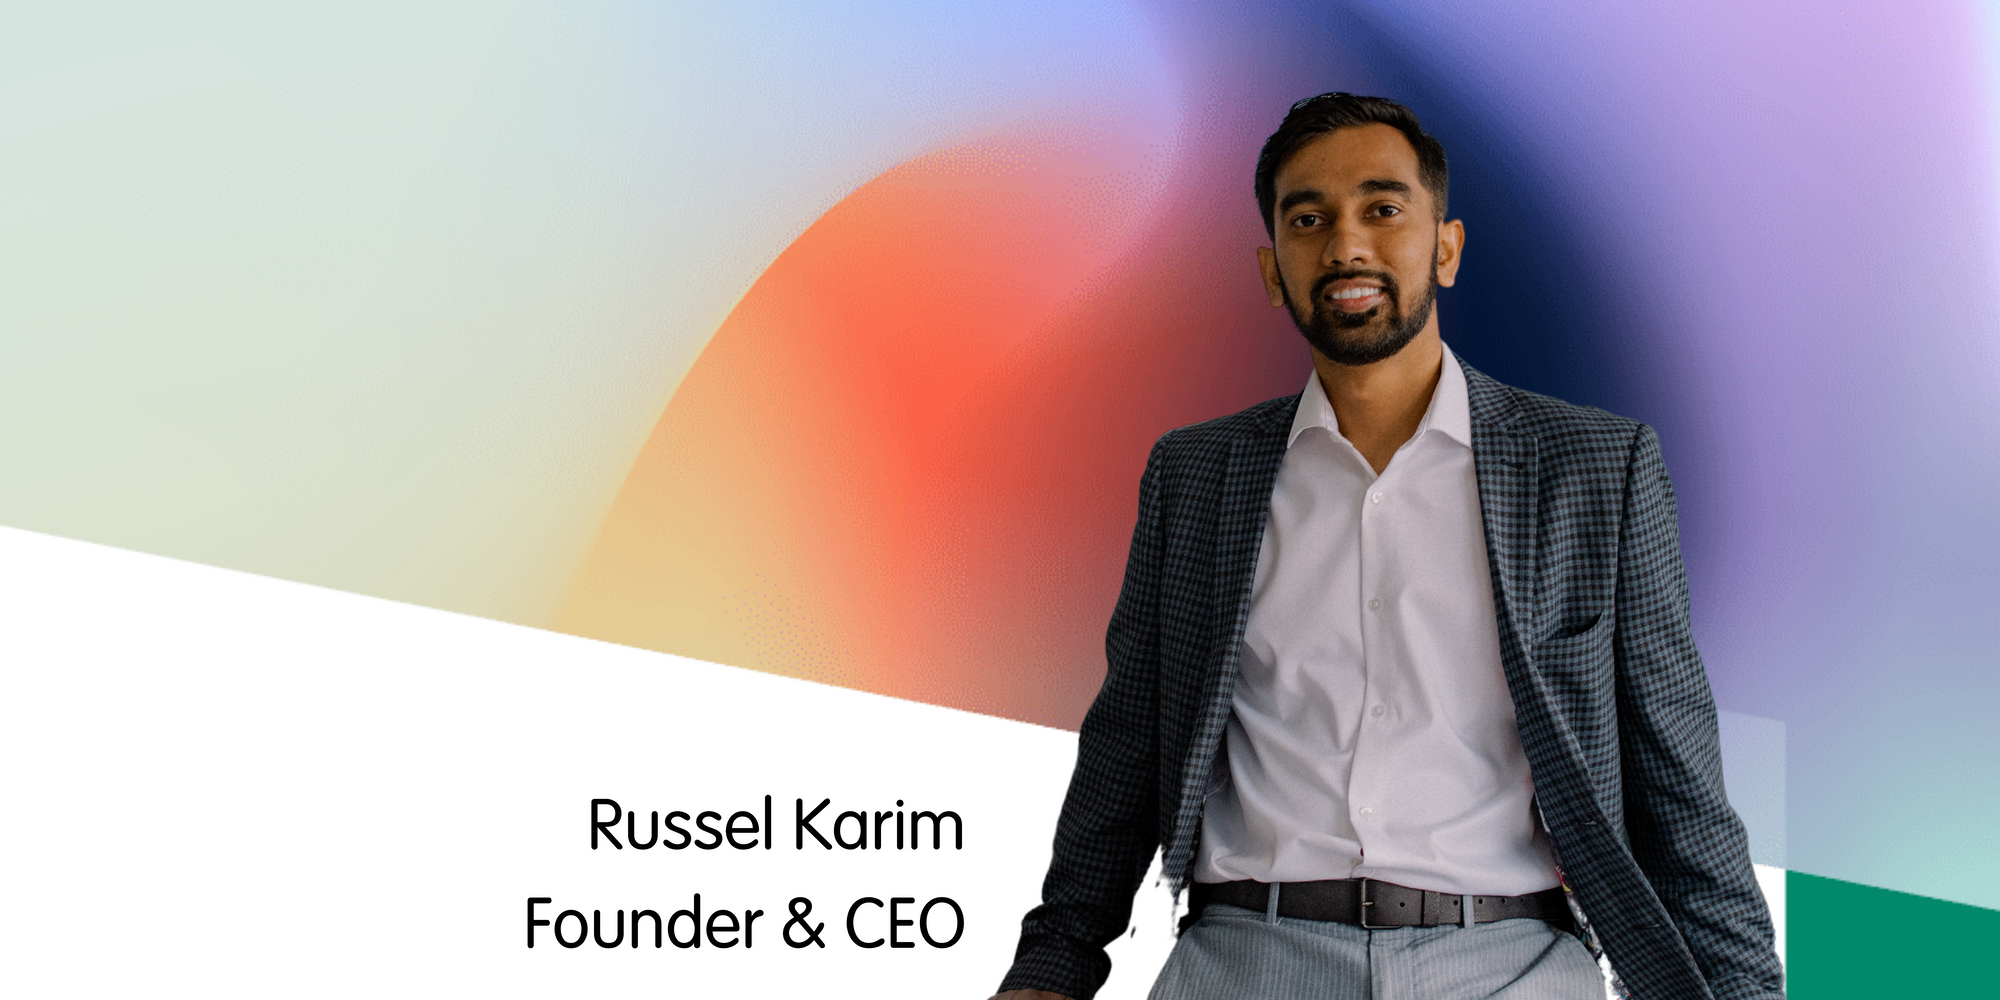 Meet Russel Karim, Founder and CEO